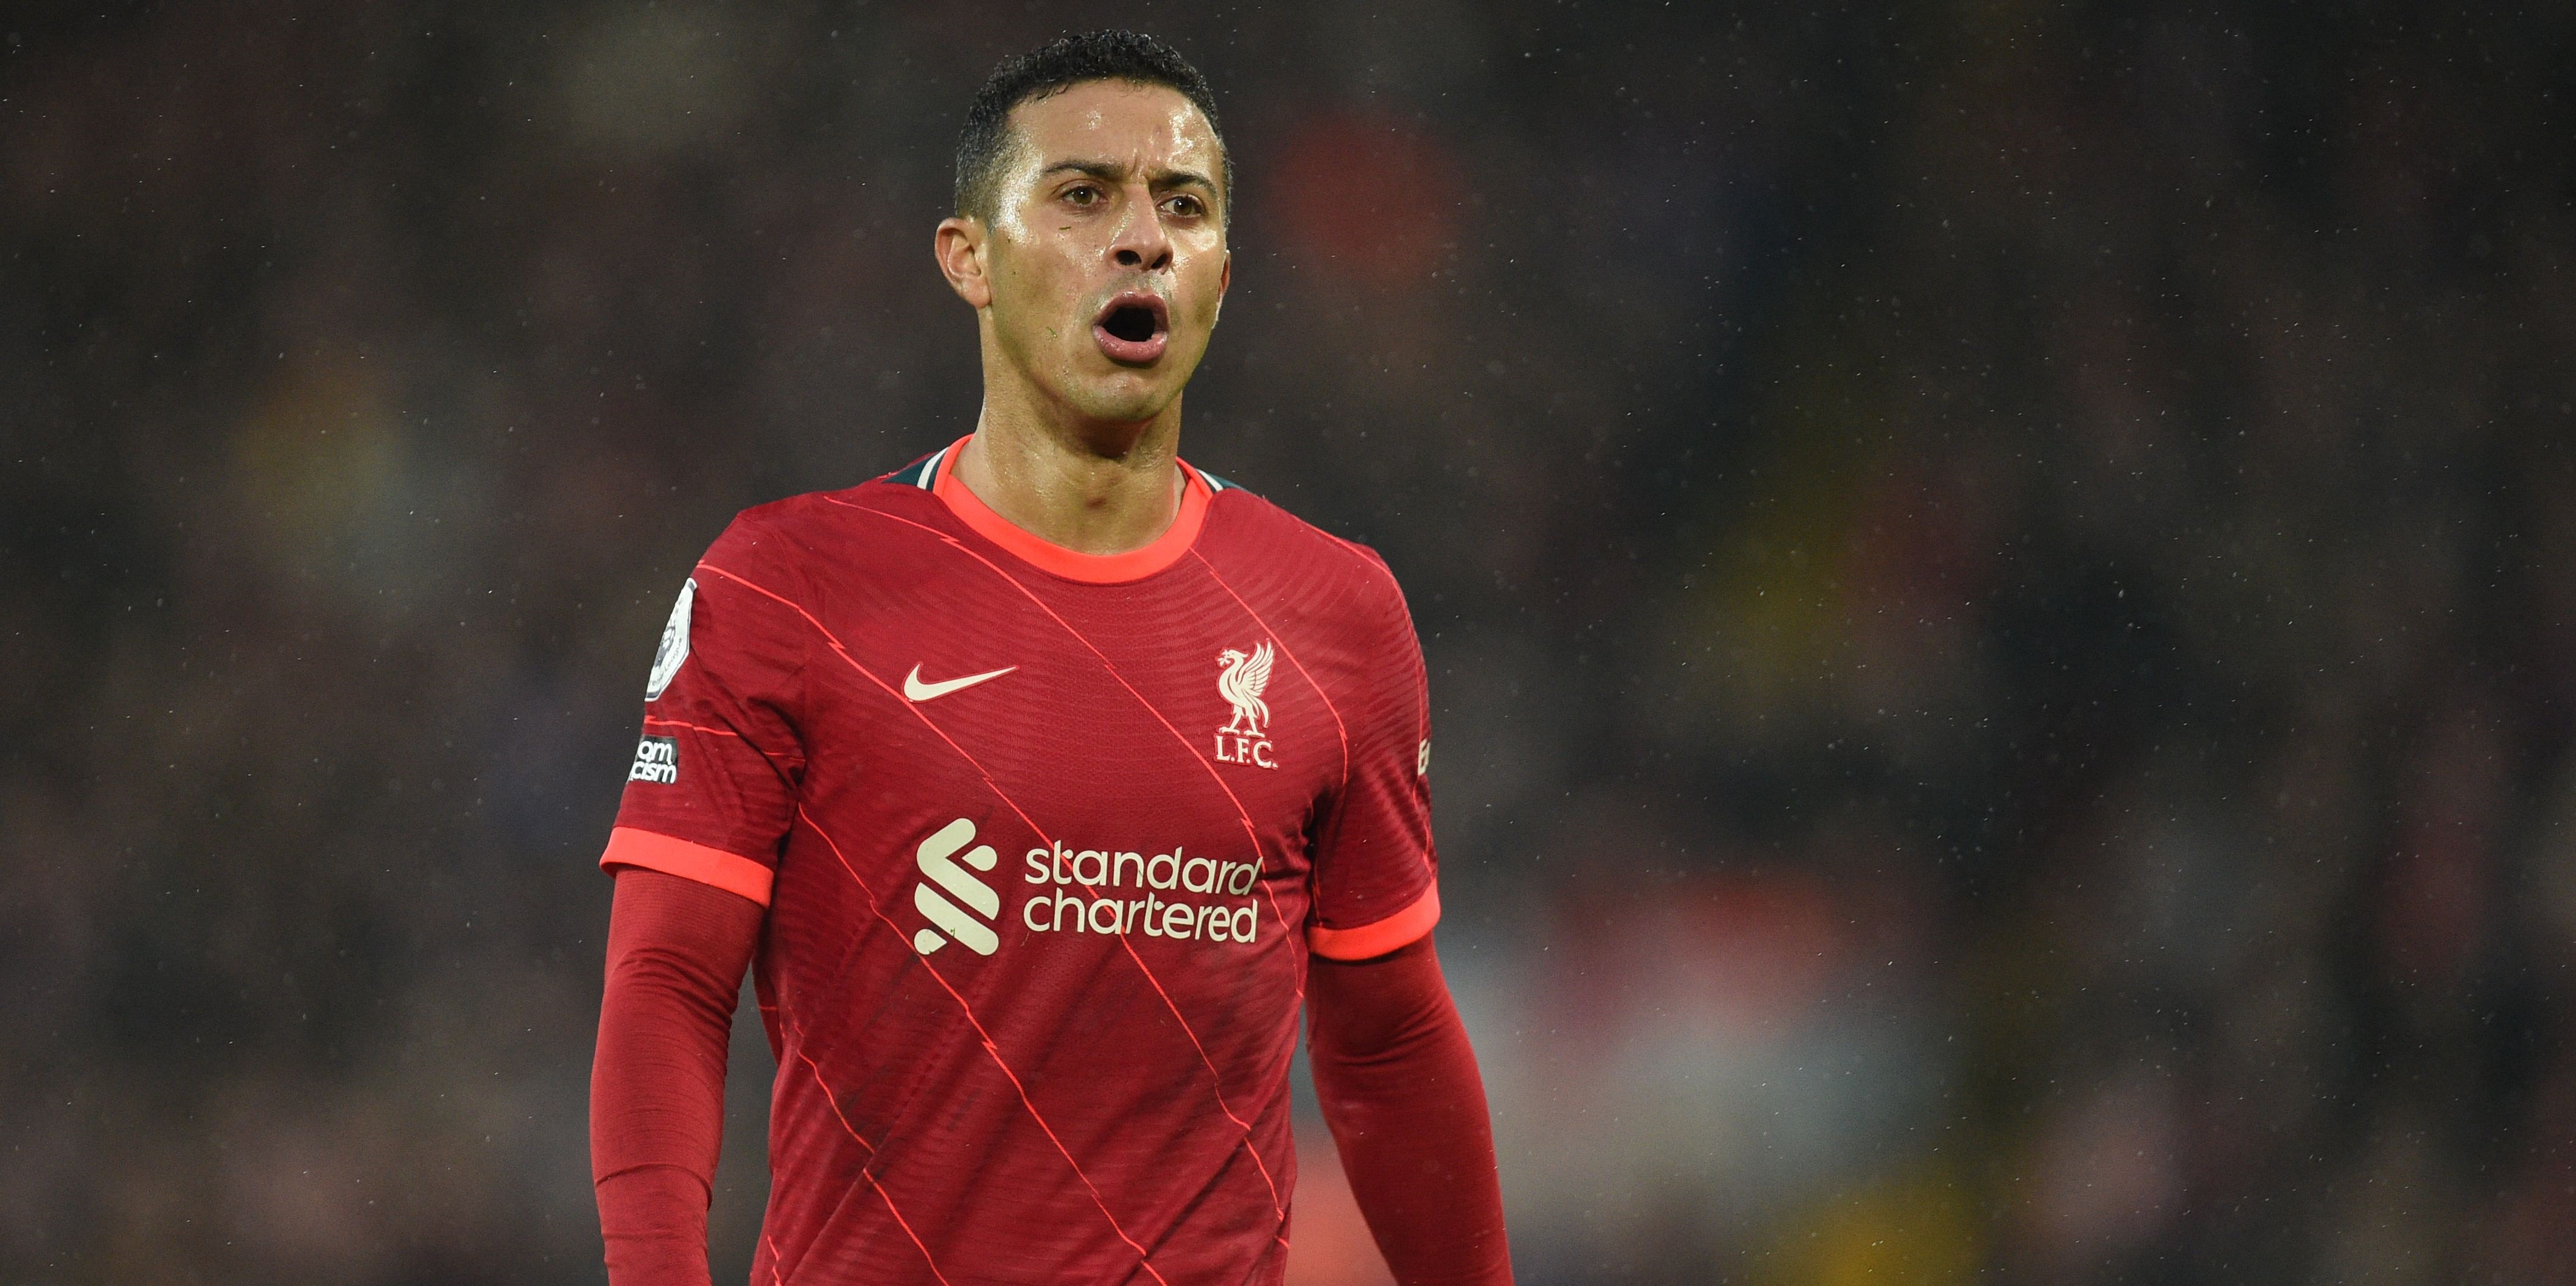 ‘He made the difference’ – BBC pundit blown away by 30-year-old Liverpool star’s masterclass v Norwich